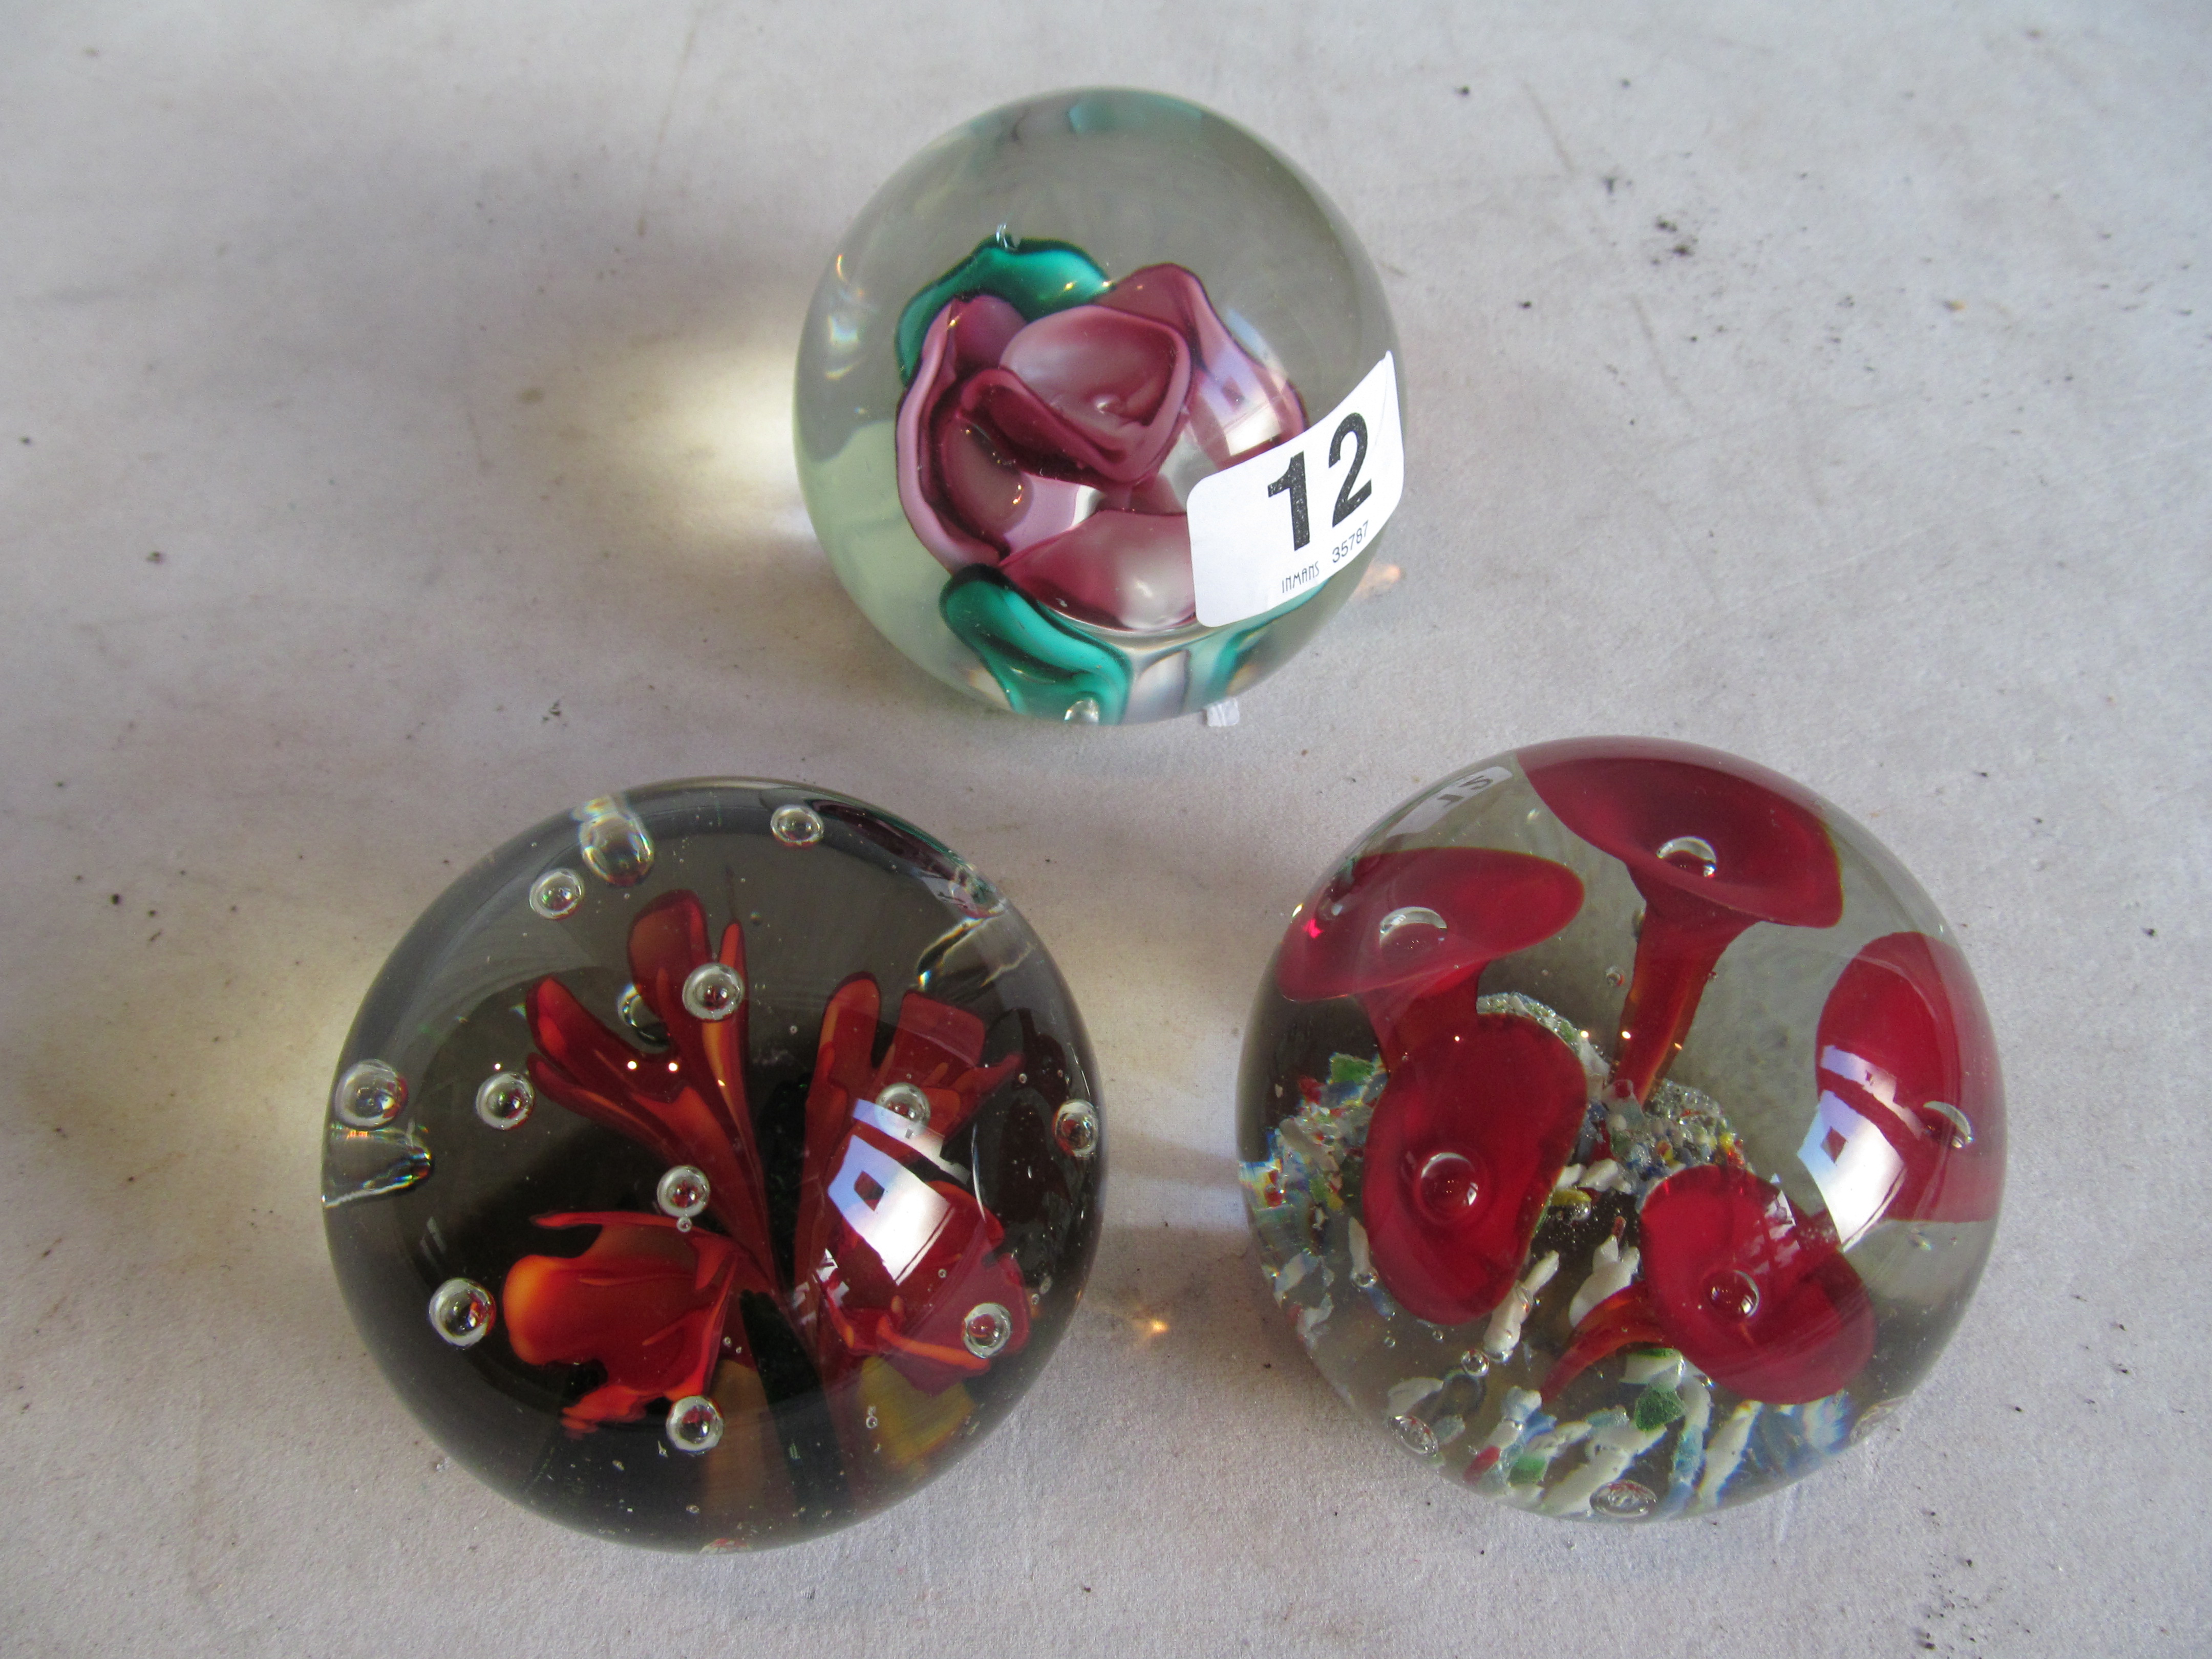 A lampwork paperweight and two flower paperweights.